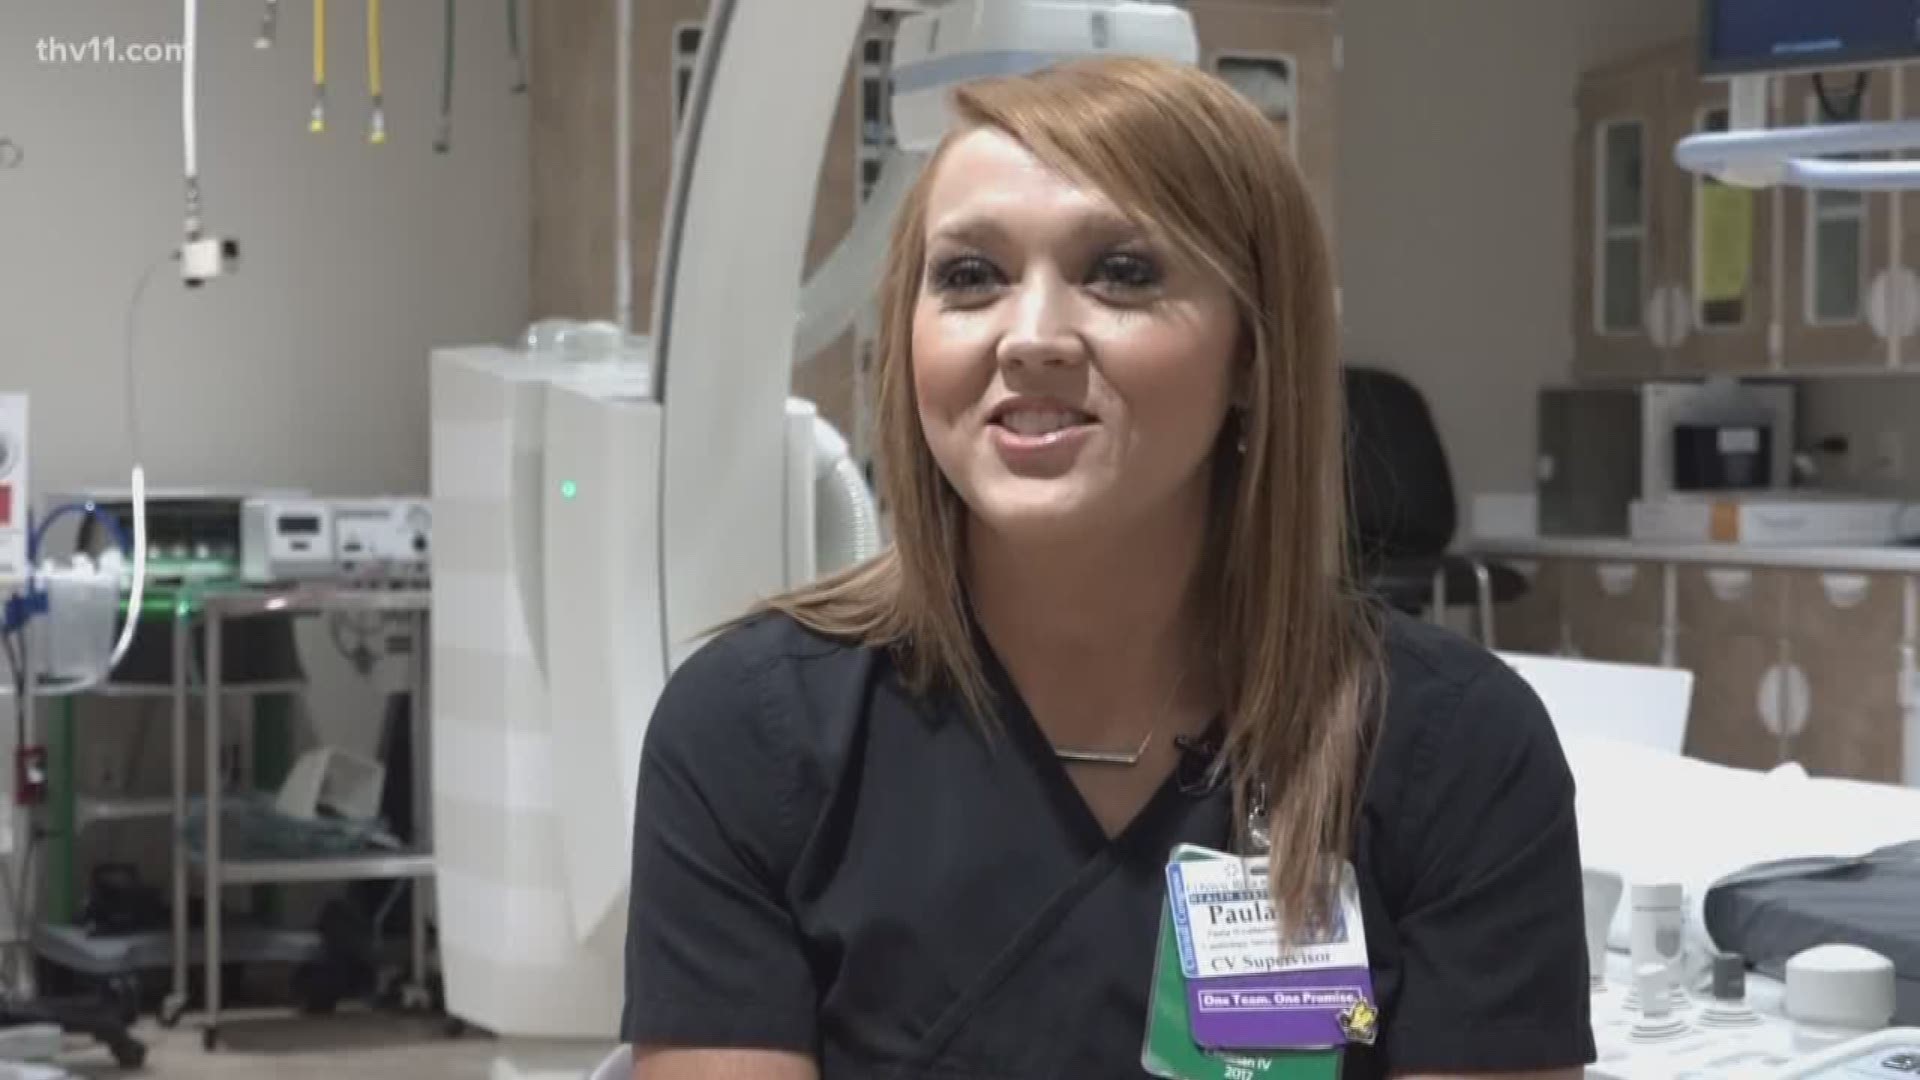 An employee at Conway Medical Center was on-call when she was needed to help perform a life-saving procedure on a heart attack victim. She had car trouble a half-mile away and ran to make it to the hospital.